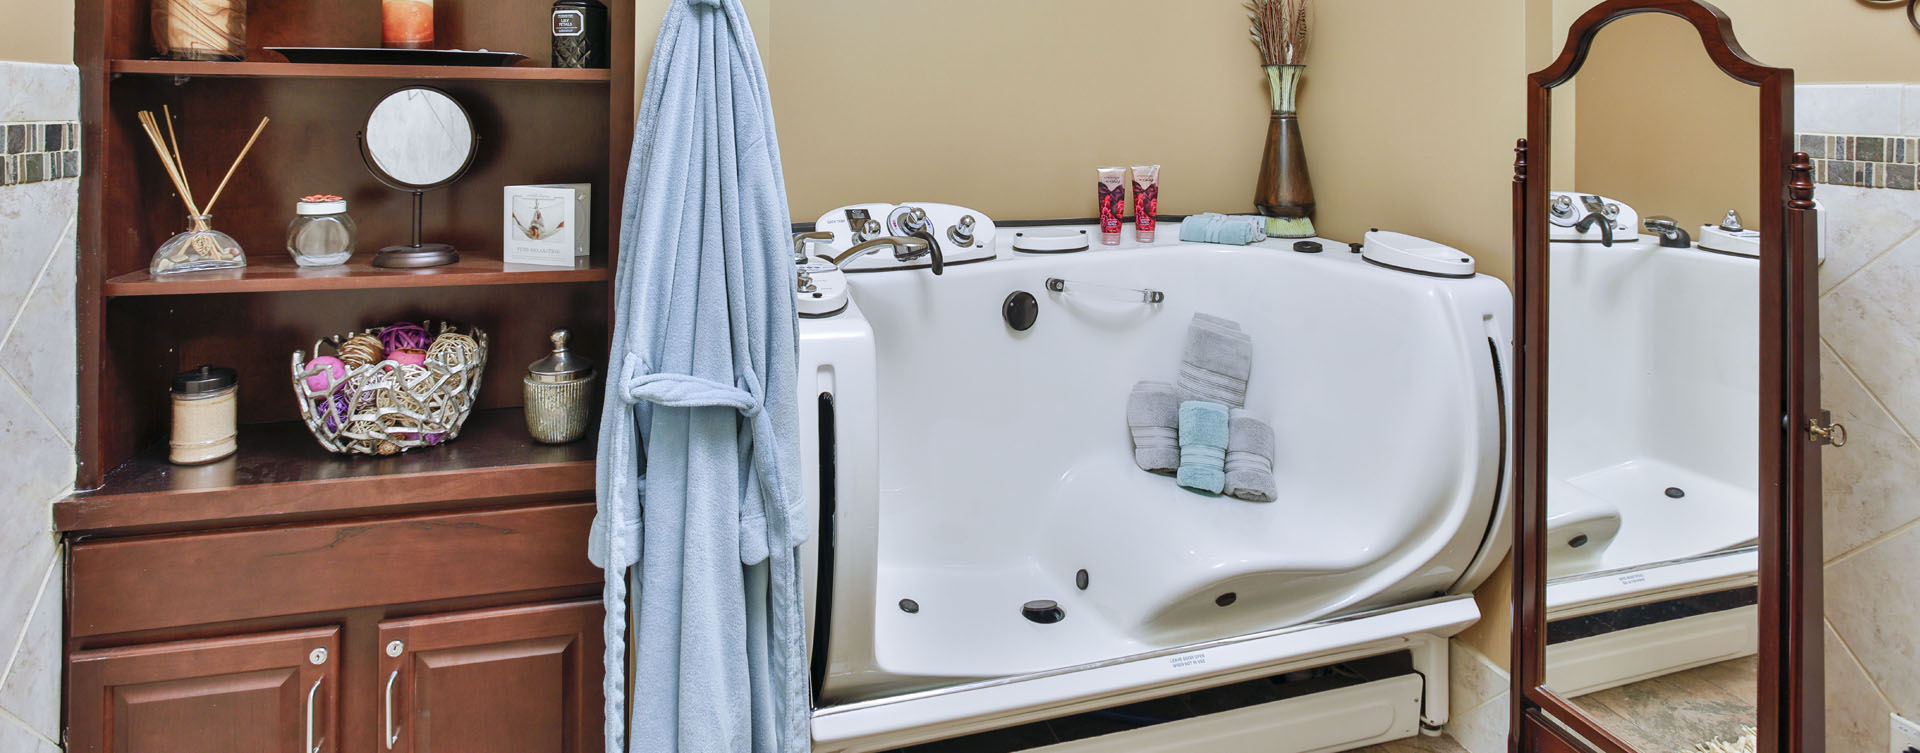 Our whirlpool bathtub creates a spa-like environment tailored to enhance your relaxation and enjoyment at Bickford of Greenwood